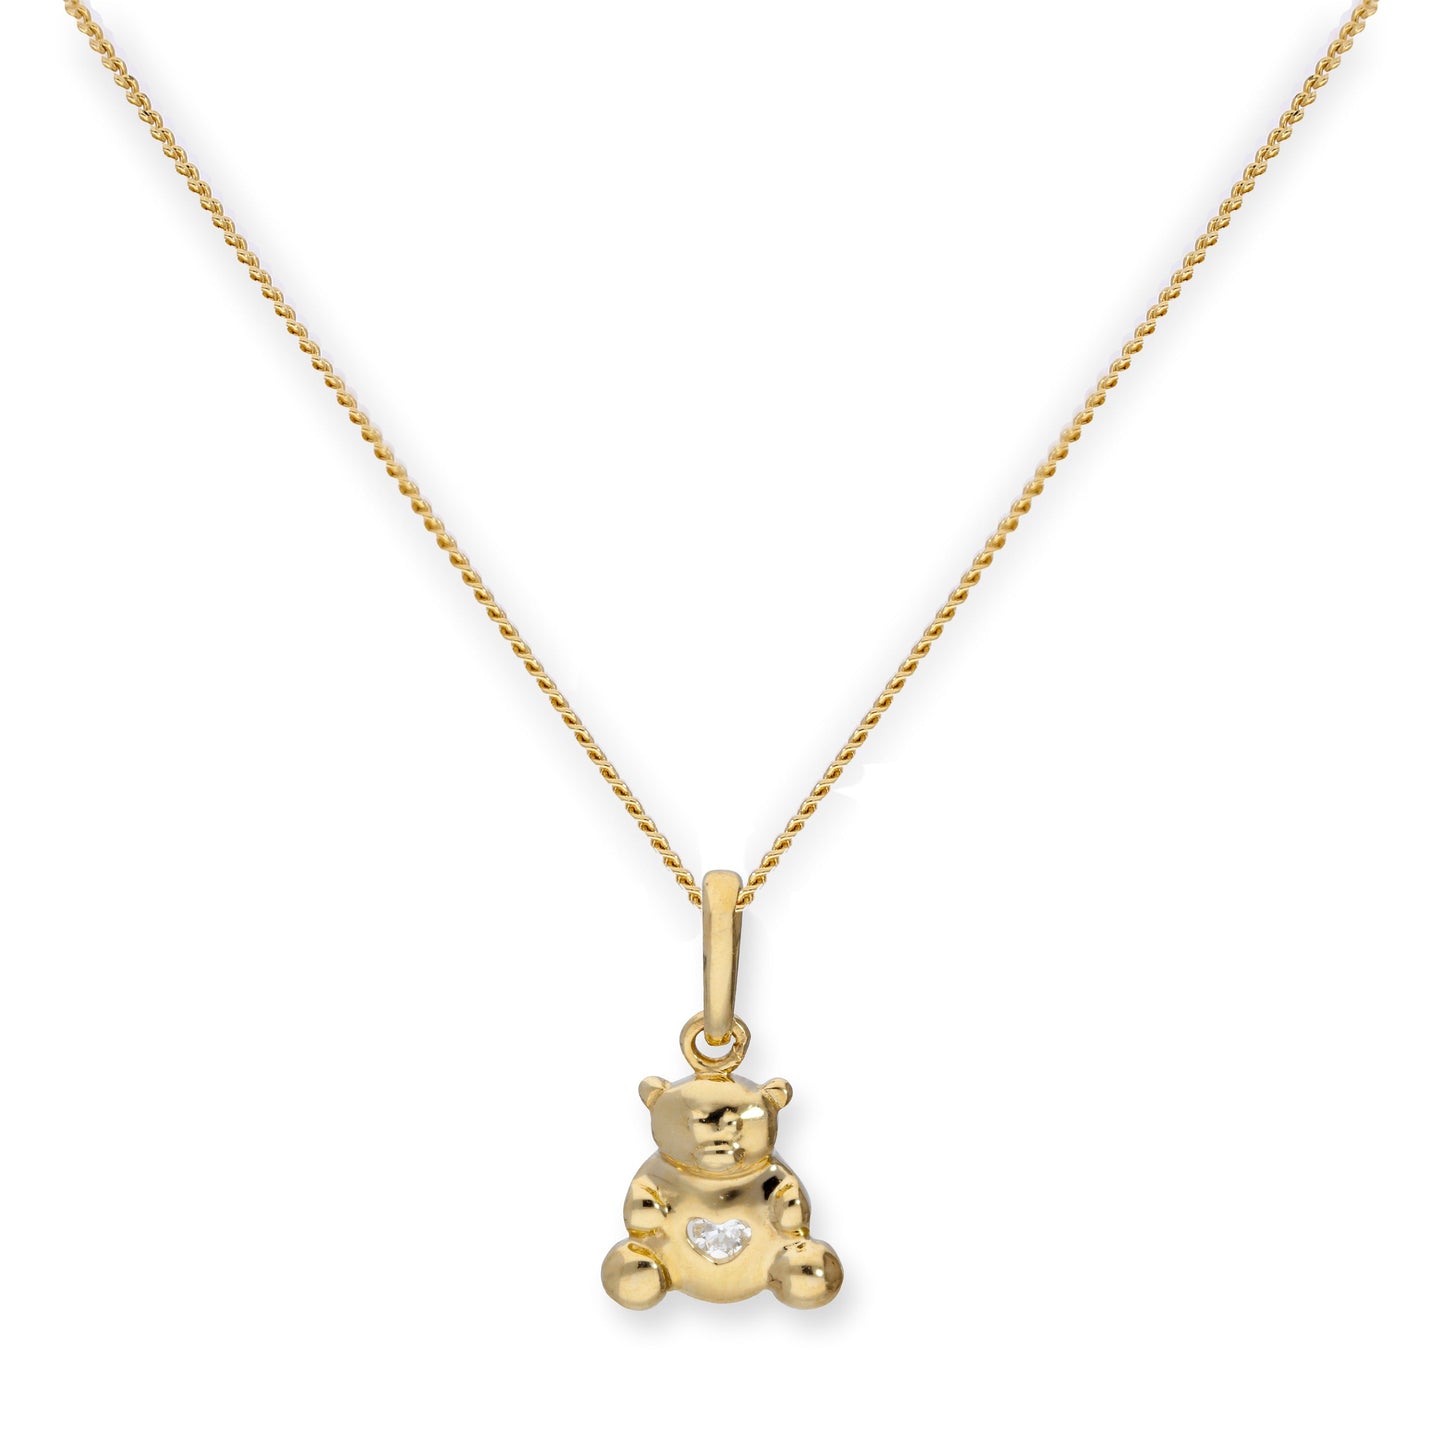 9ct Gold Teddy Bear w Clear CZ Crystal Heart Pendant Necklace 16 - 20 Inches